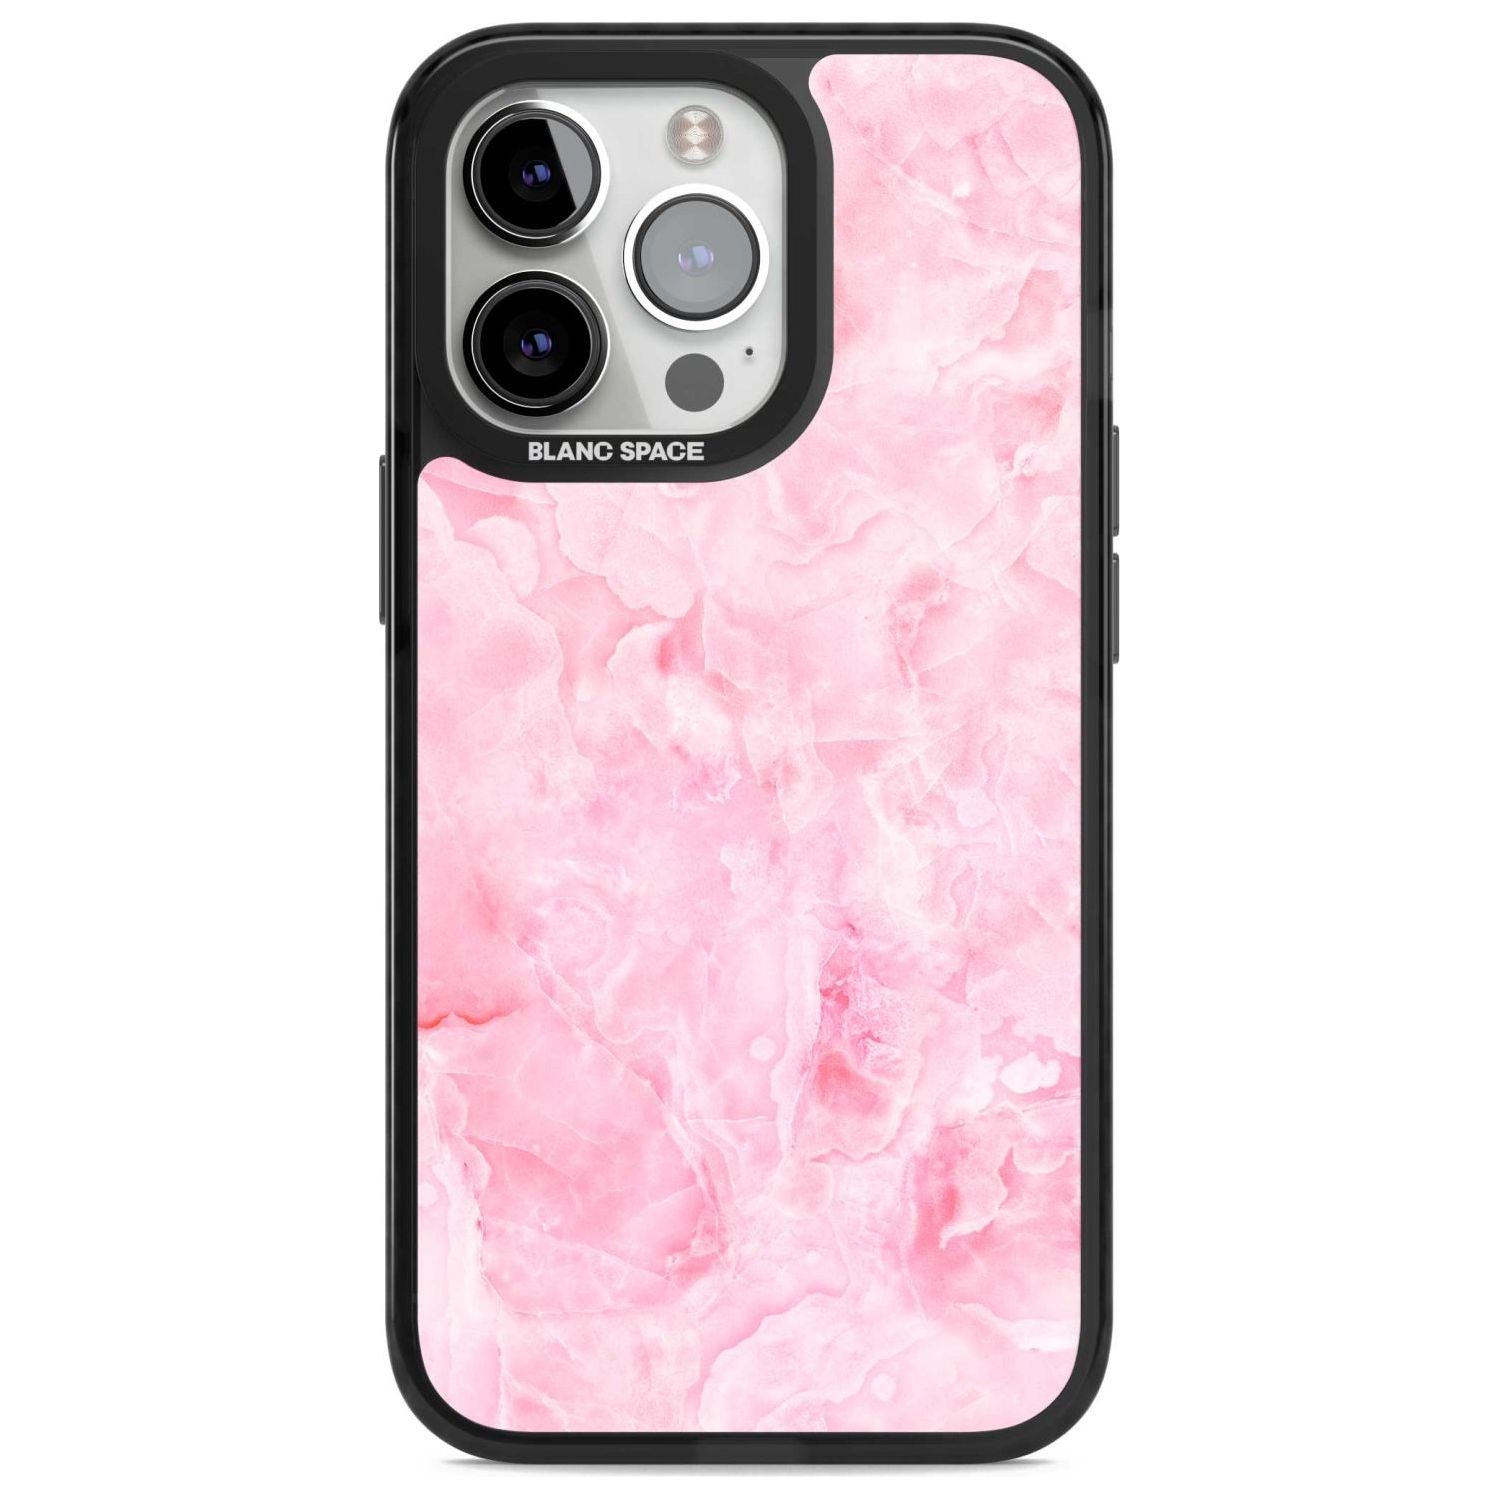 Bright Pink Onyx Marble Texture Phone Case iPhone 15 Pro Max / Magsafe Black Impact Case,iPhone 15 Pro / Magsafe Black Impact Case,iPhone 14 Pro Max / Magsafe Black Impact Case,iPhone 14 Pro / Magsafe Black Impact Case,iPhone 13 Pro / Magsafe Black Impact Case Blanc Space